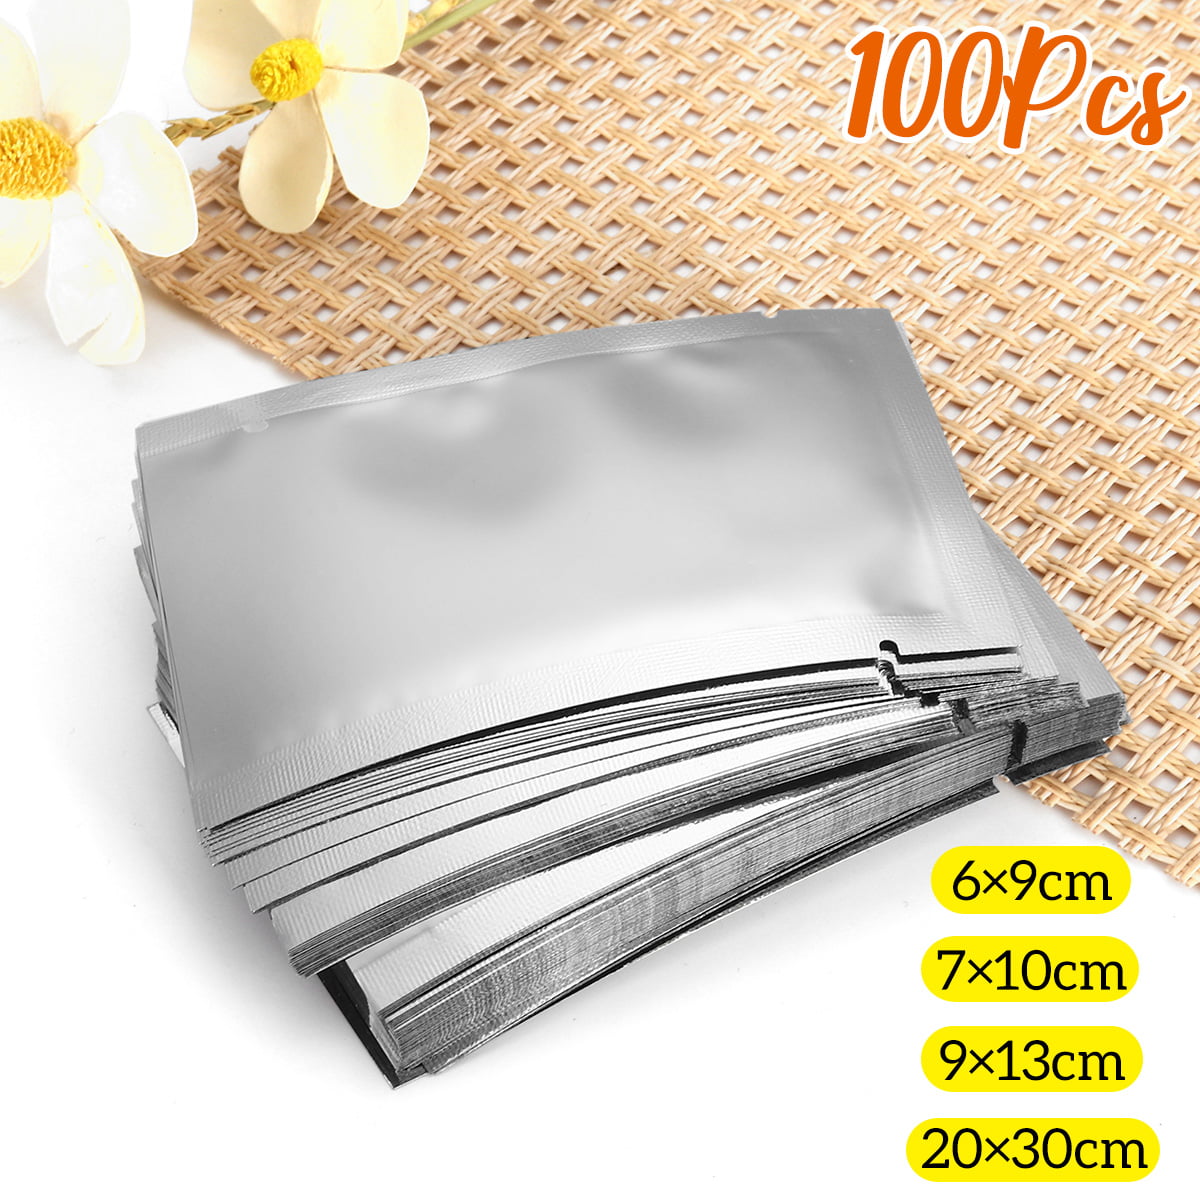 Colorful Open Top Heat Seal Mylar Foil Bag Aluminum Food Vacuum Seal Pack Pouch